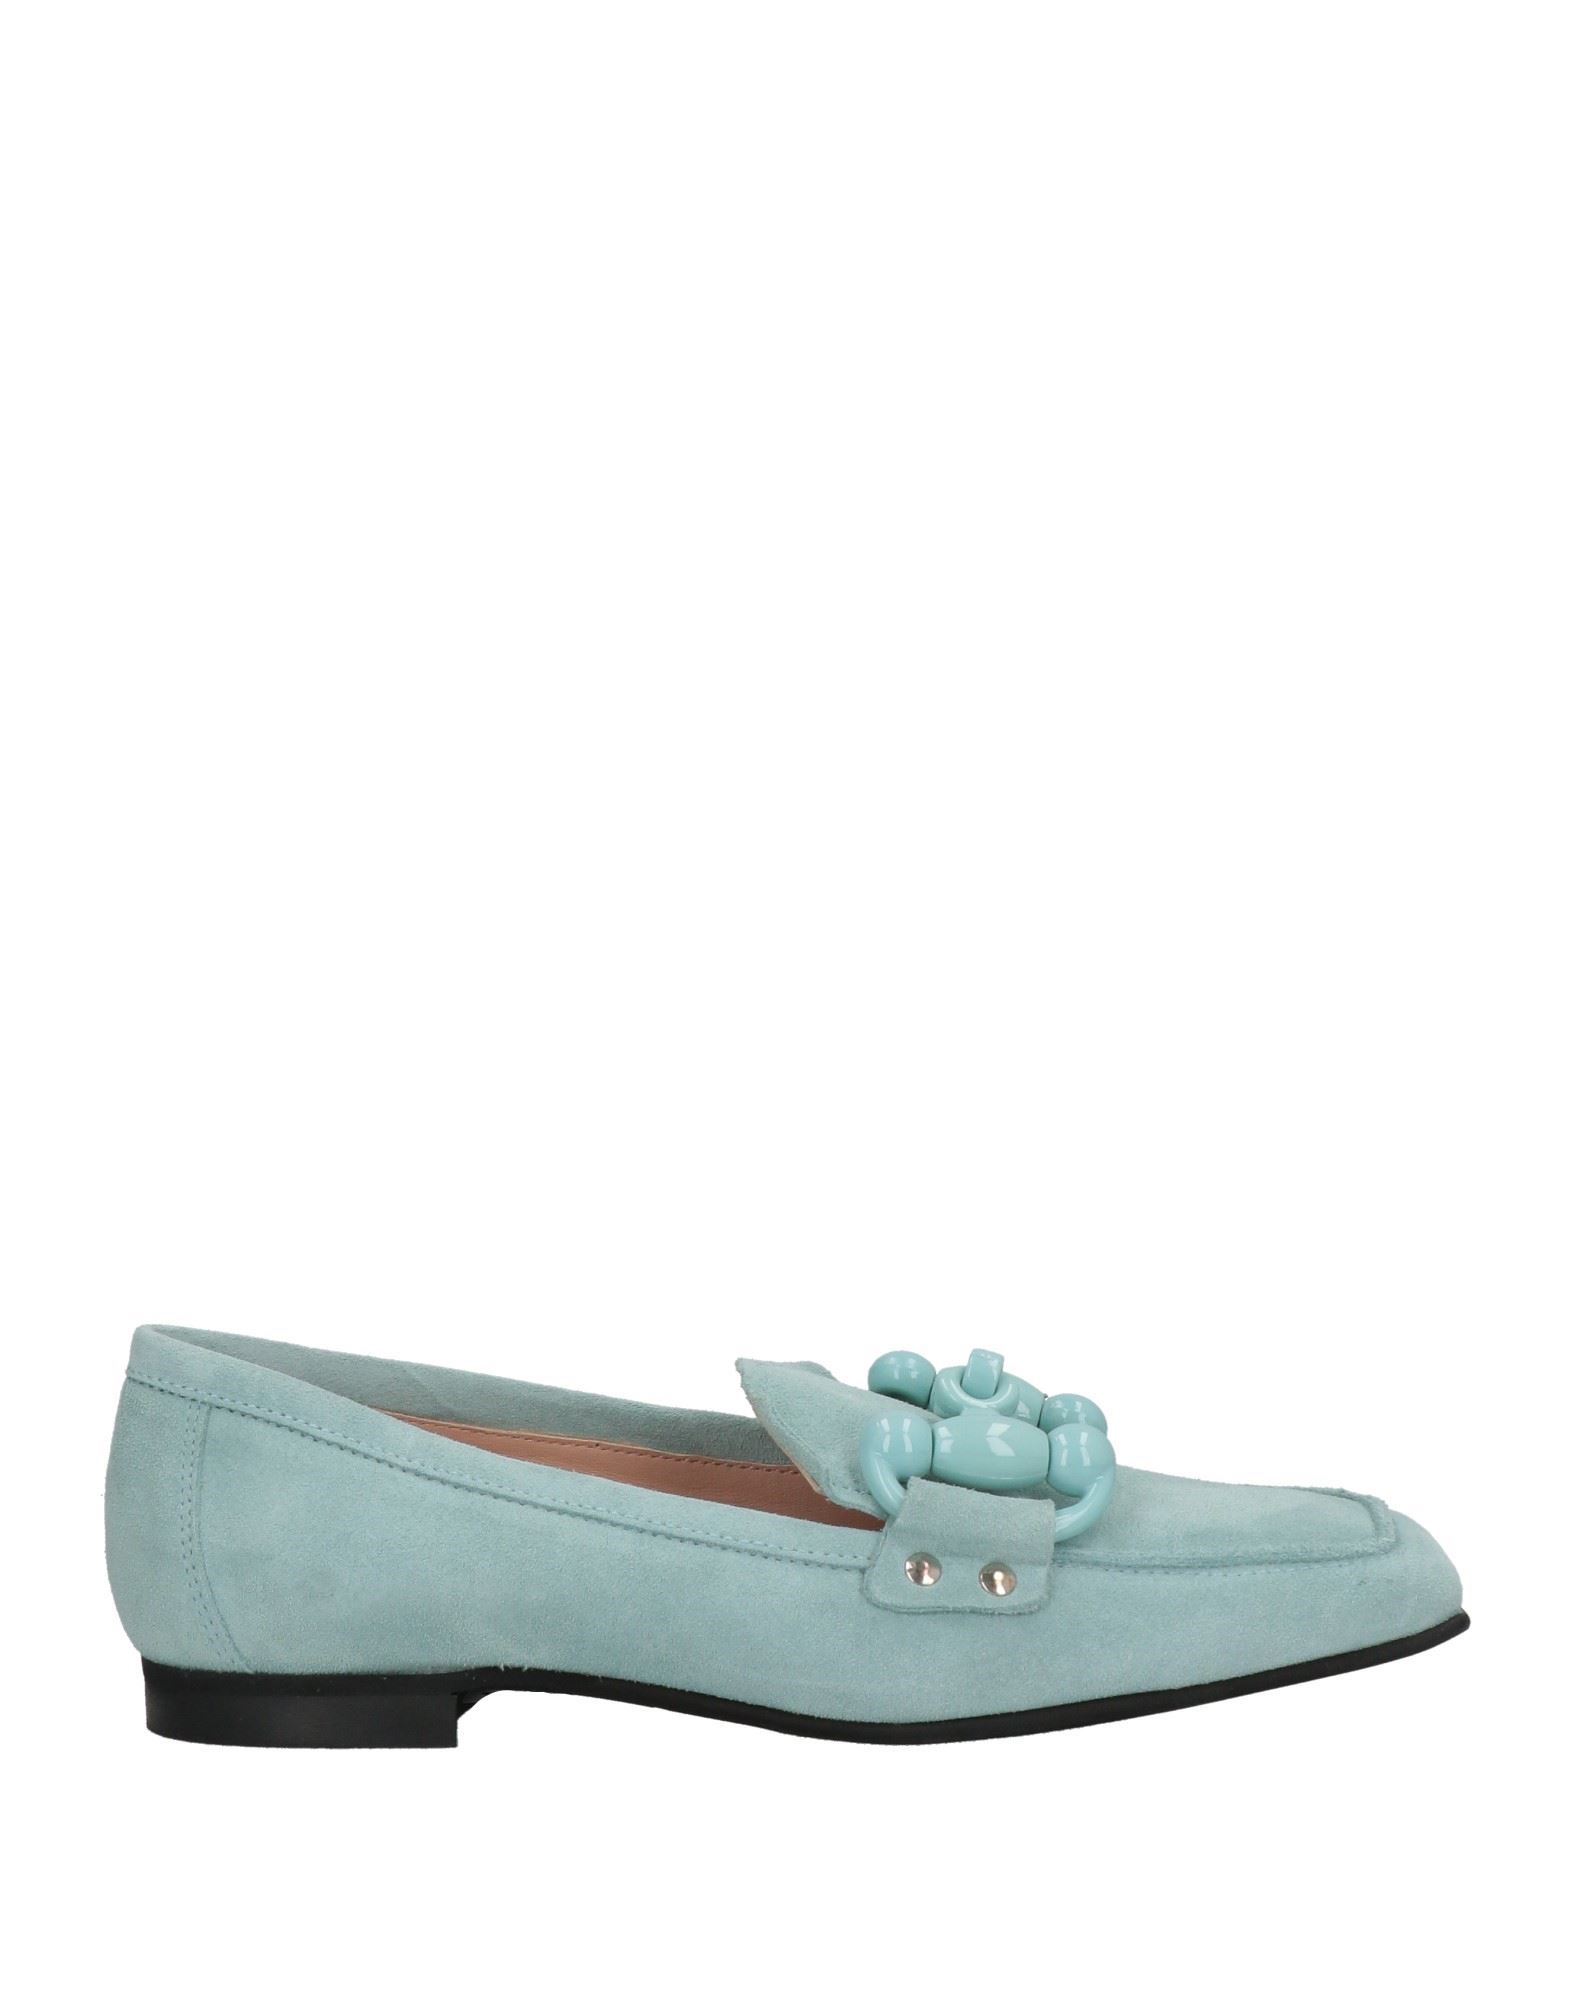 JANET & JANET JANET & JANET WOMAN LOAFERS SKY BLUE SIZE 8 SOFT LEATHER